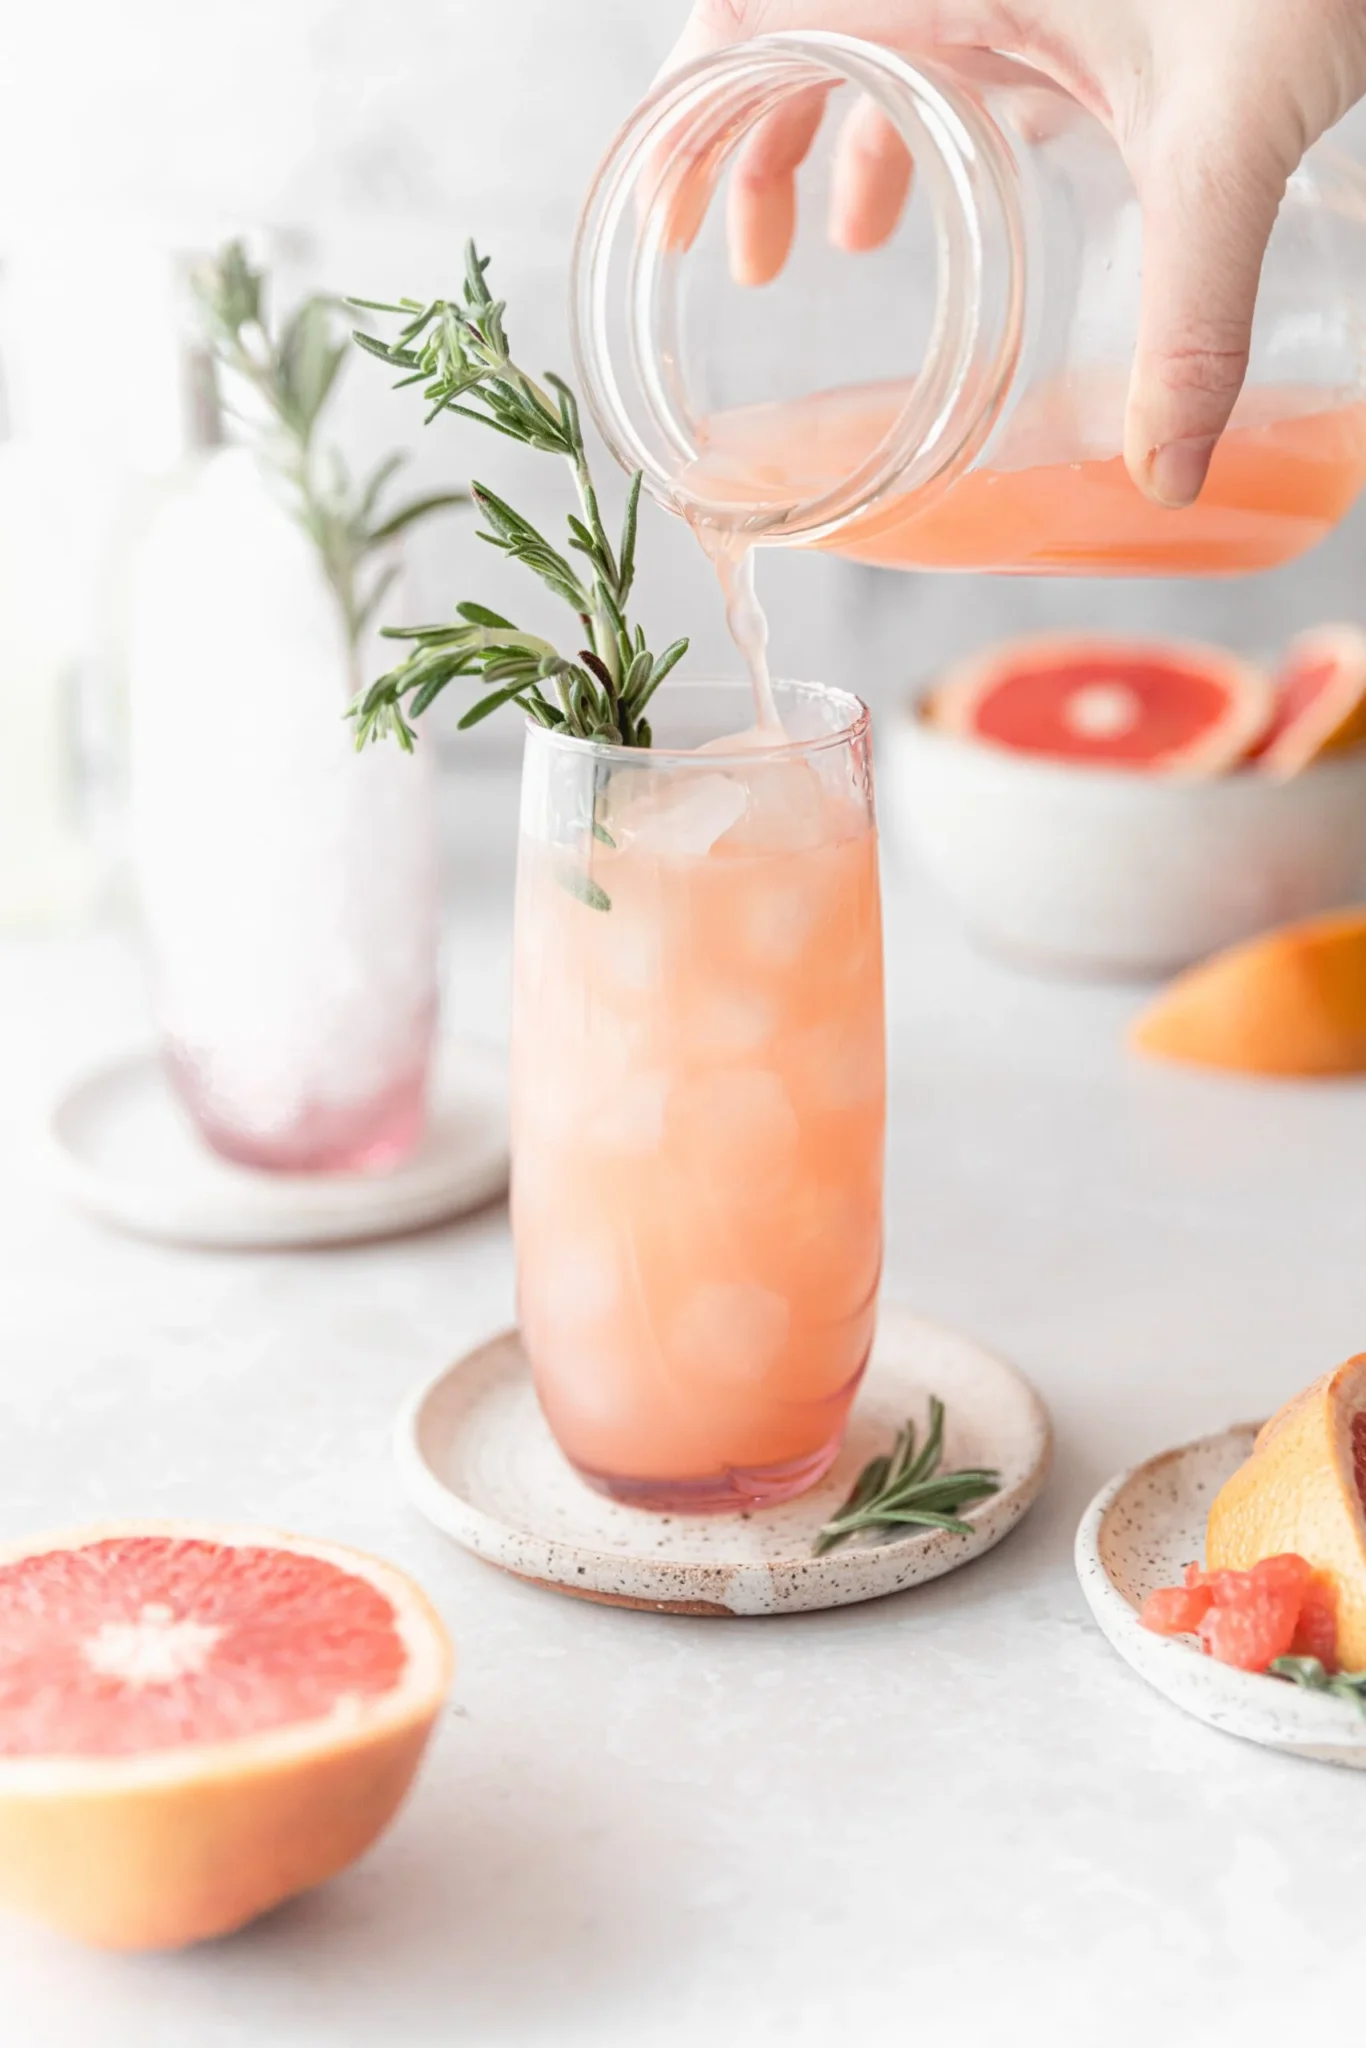 Grapefruit in a dish, a grapegruit mule in a glass with ice and rosemary